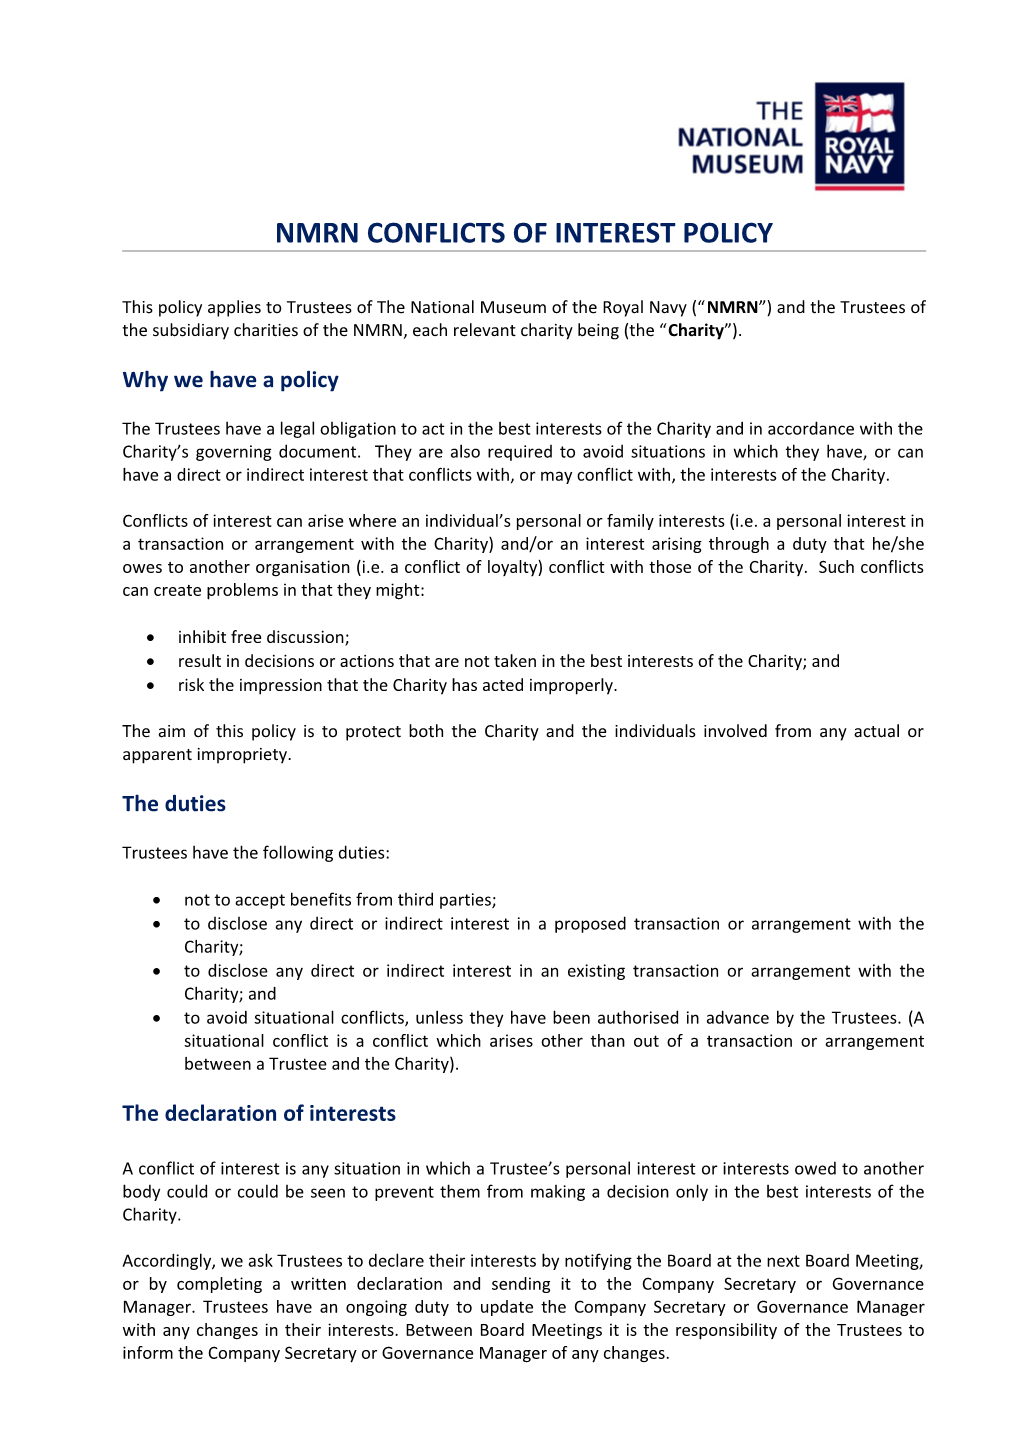 NMRN Conflicts of Interest Policy